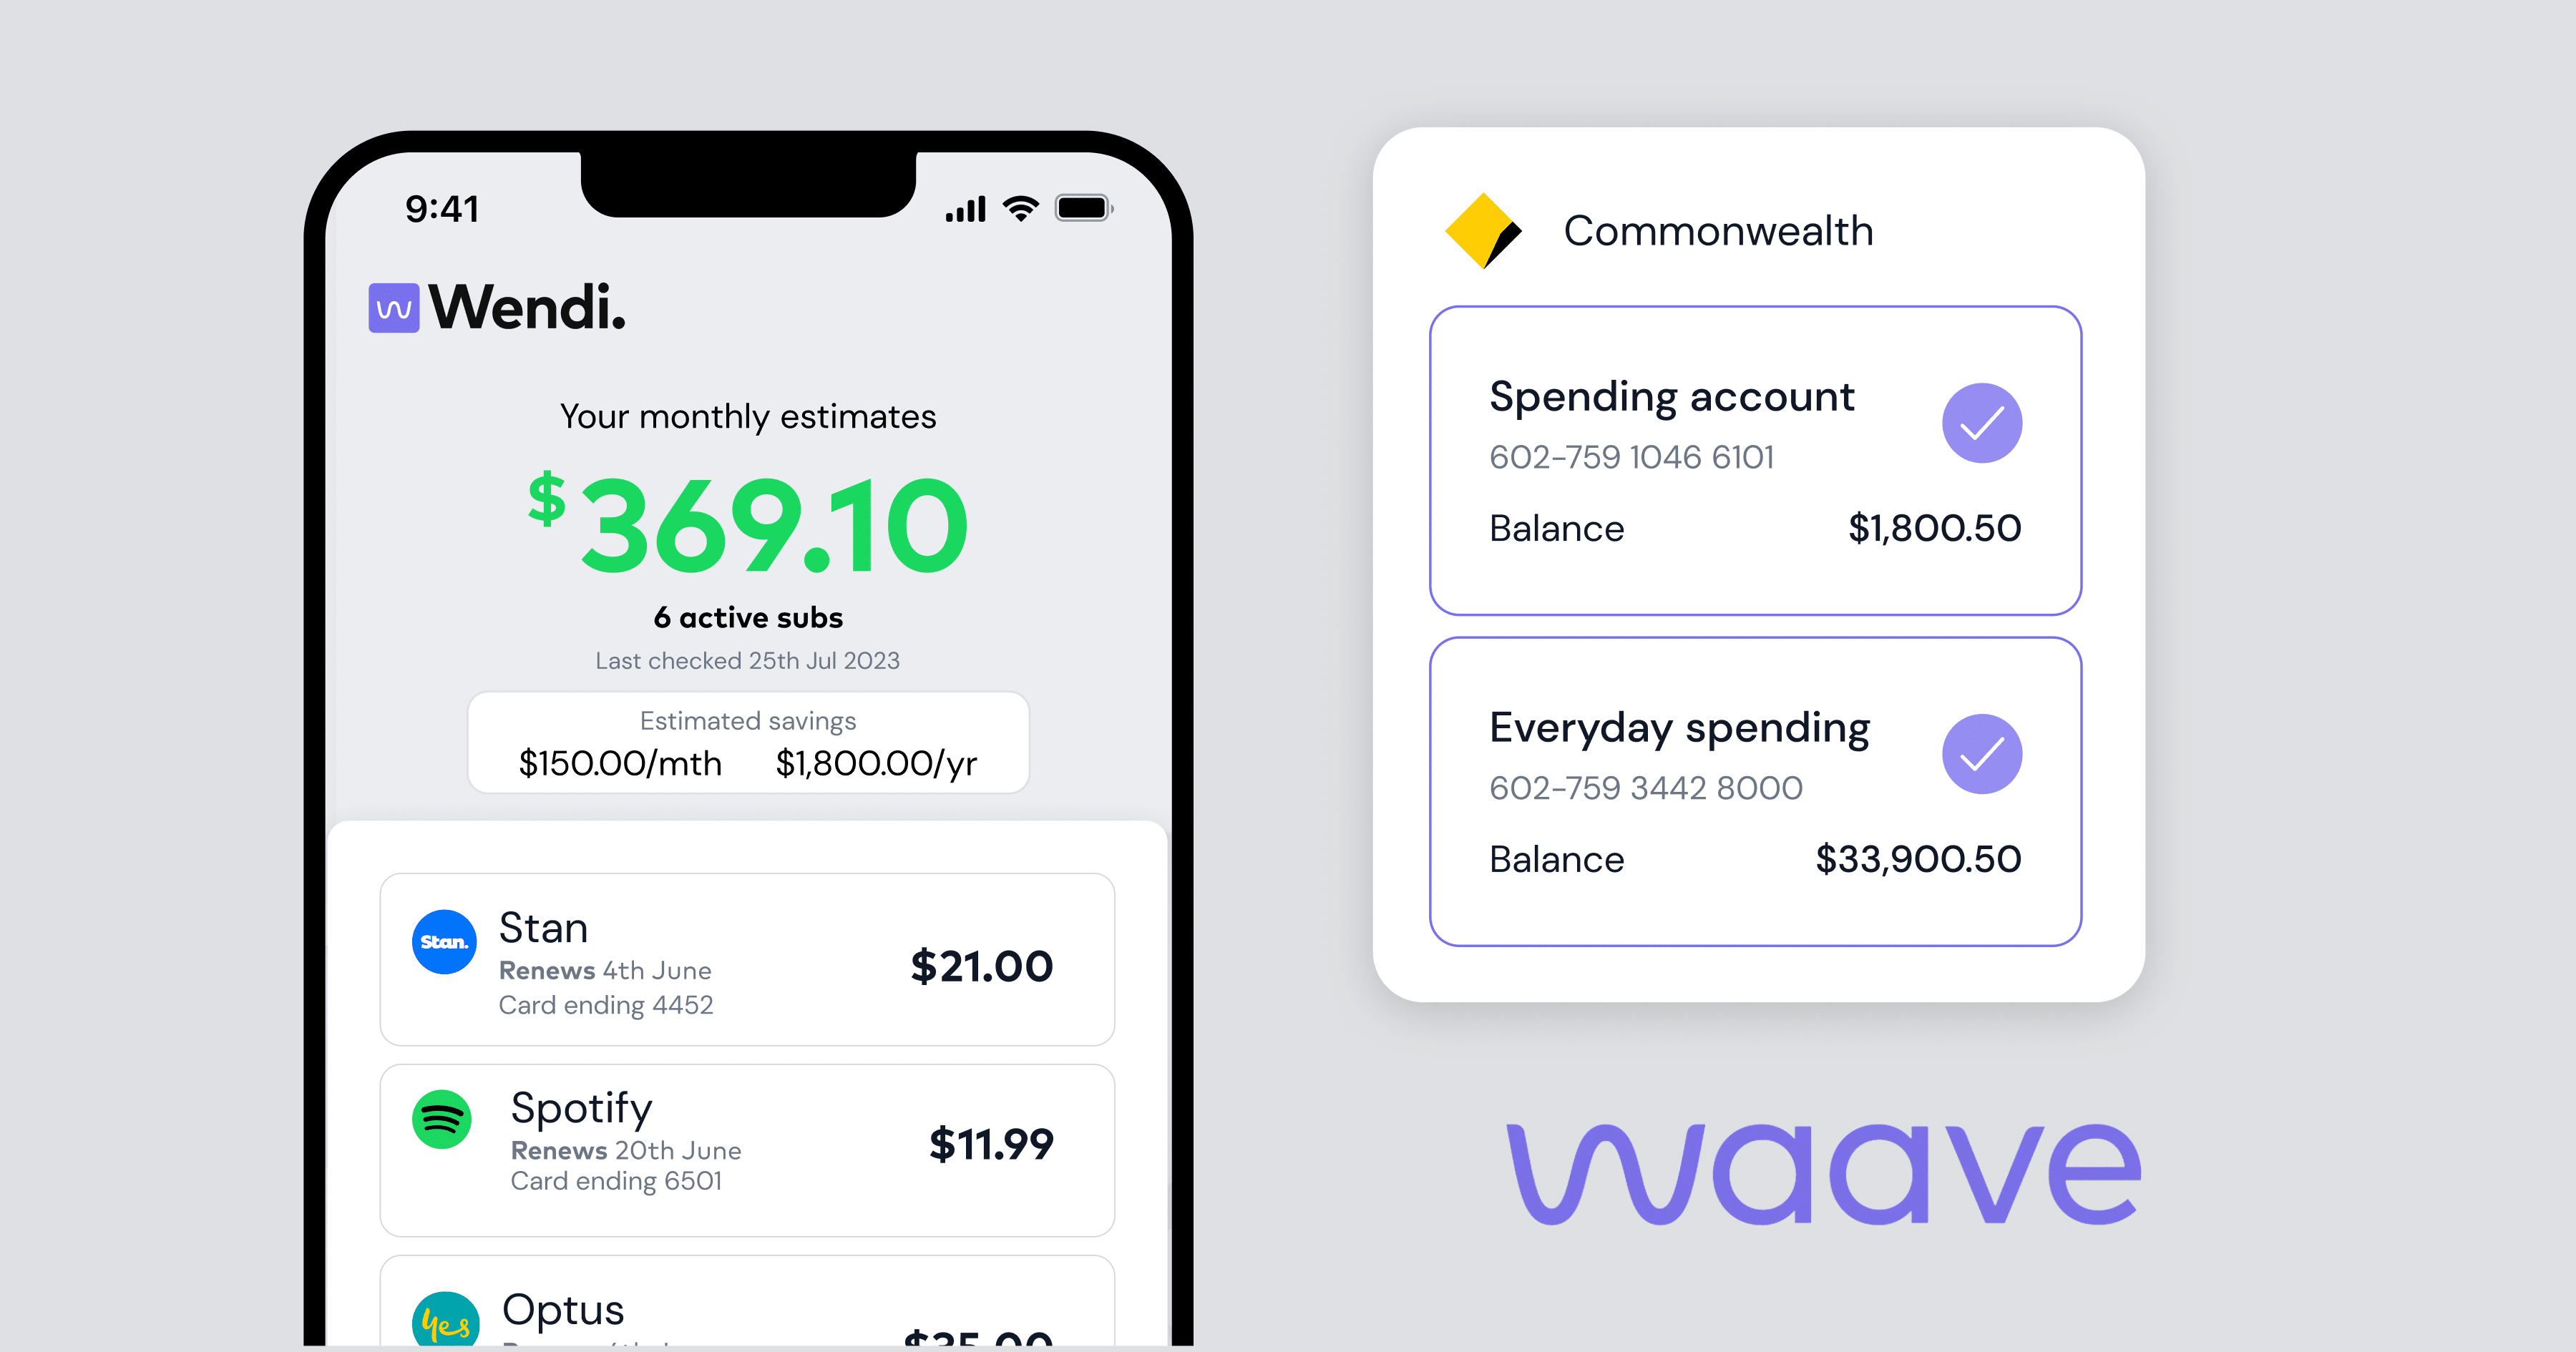 Example of Waave using Open Banking